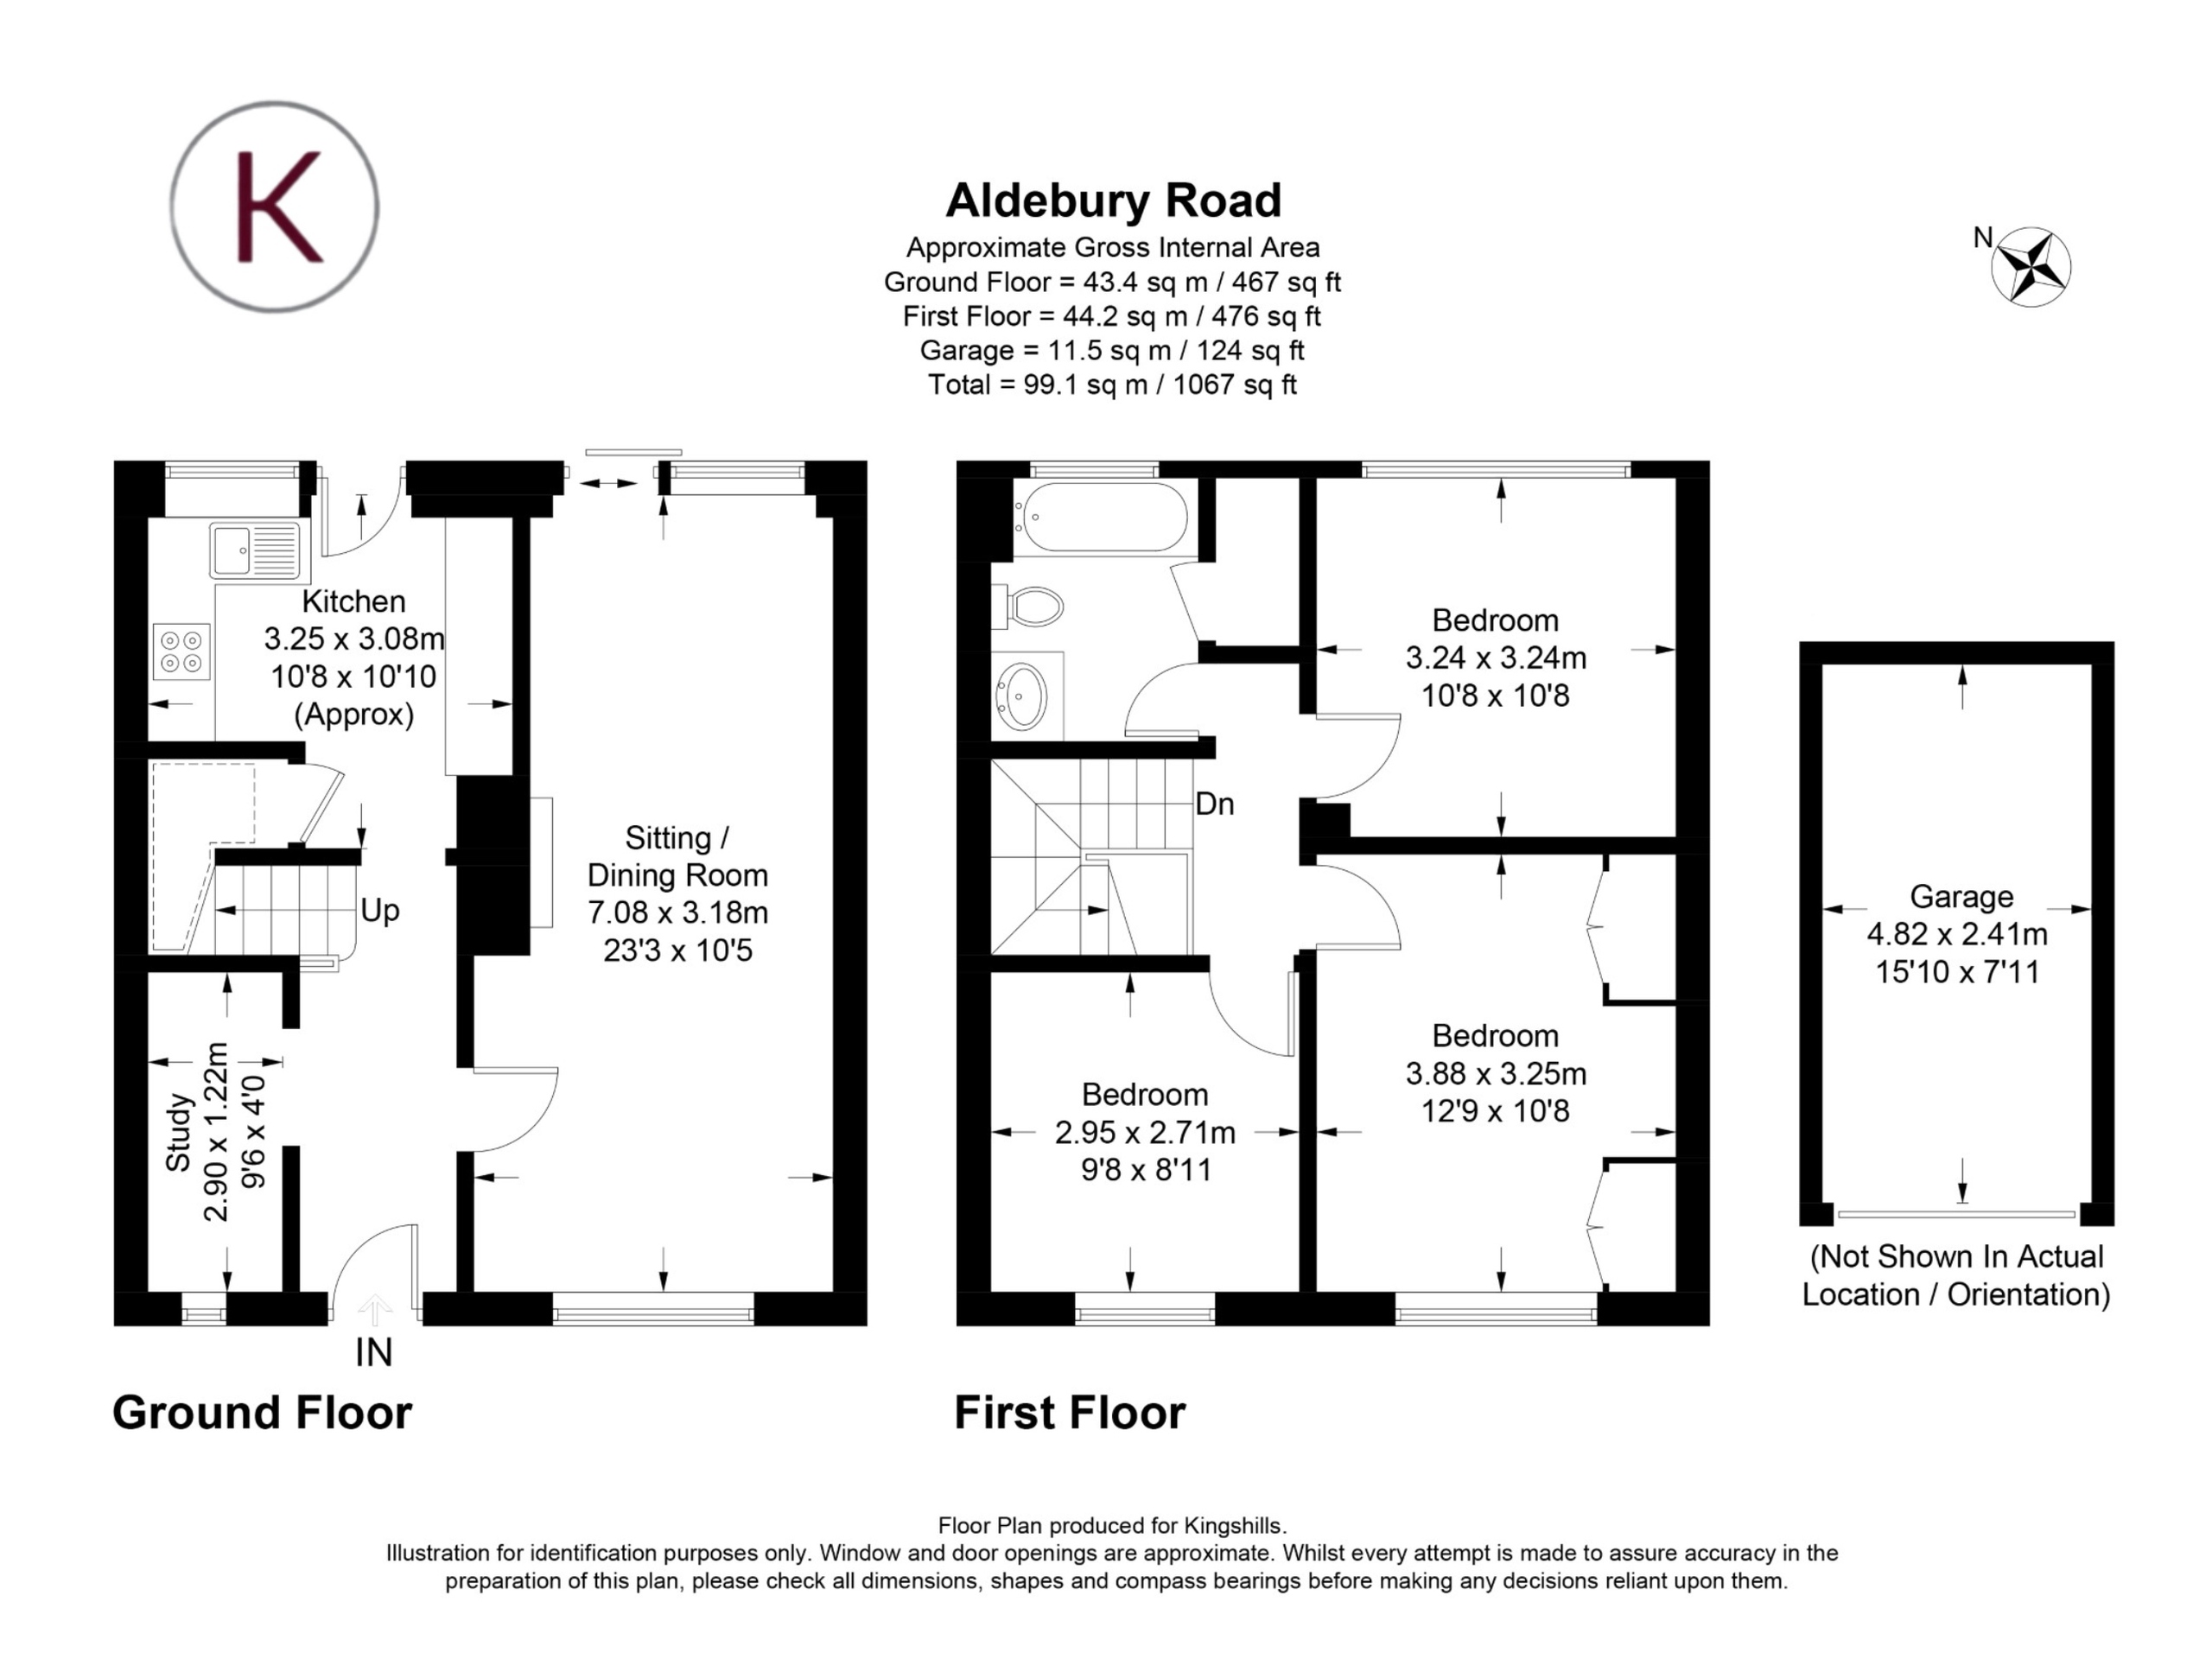 3 bed terraced house for sale in Aldebury Road, Maidenhead - Property floorplan